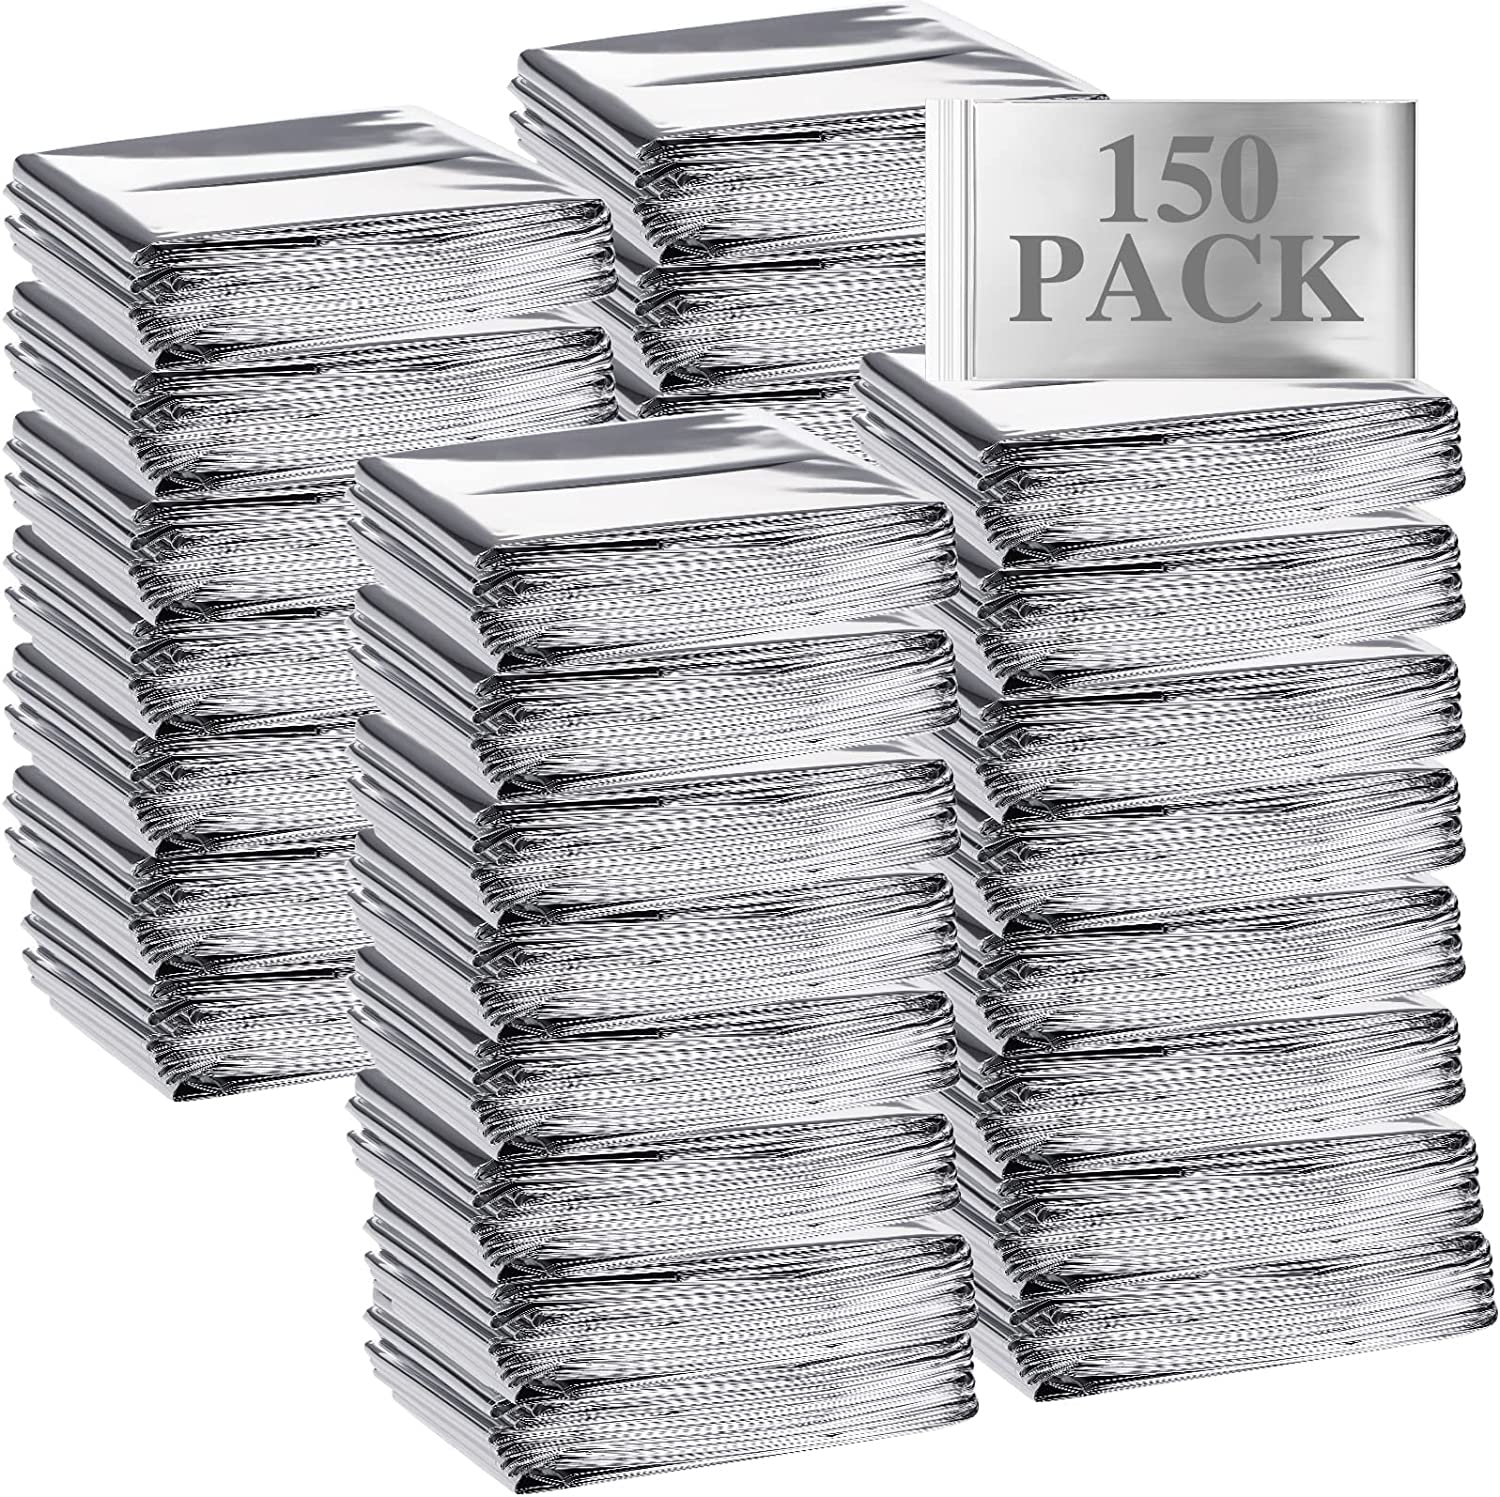 Emergency Blanket Bulk Mylar Survival Thermal Blankets Pack Silver Foil Reflective Blankets for Cold Outdoors Camping Hiking First Aid Shelter Space Emergency Supplies Blanket Set (150 Pieces)